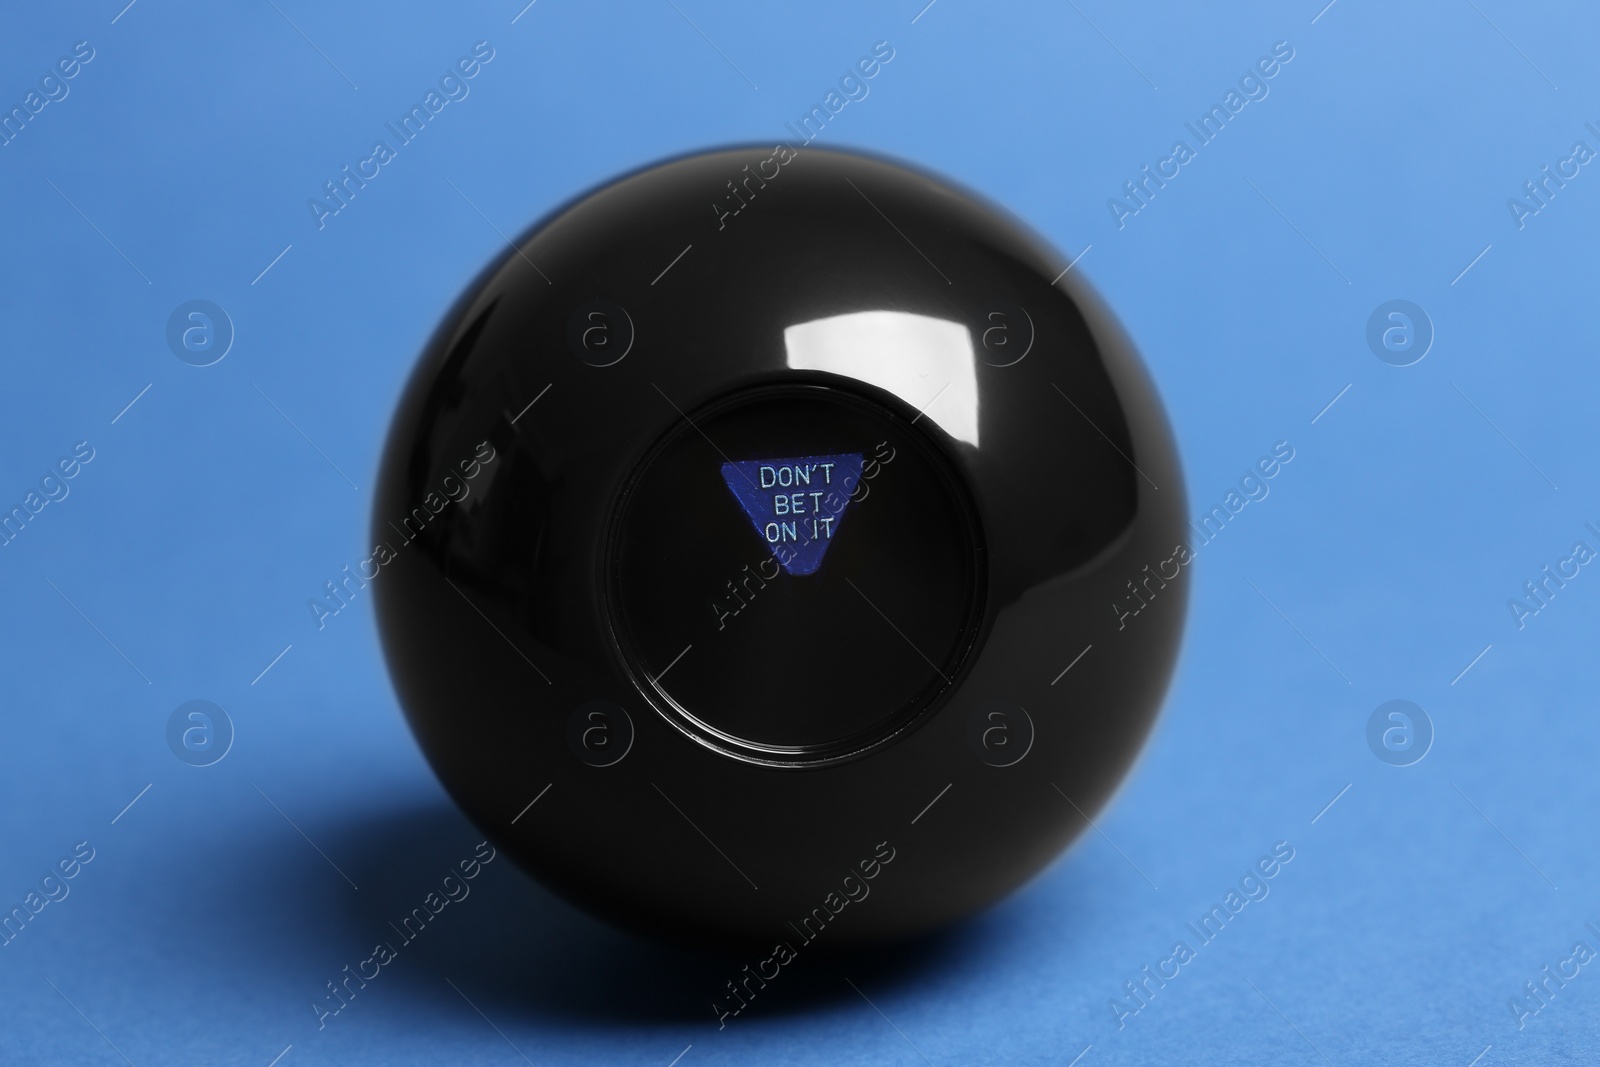 Photo of Magic eight ball with prediction Donʼt Bet On It on blue background